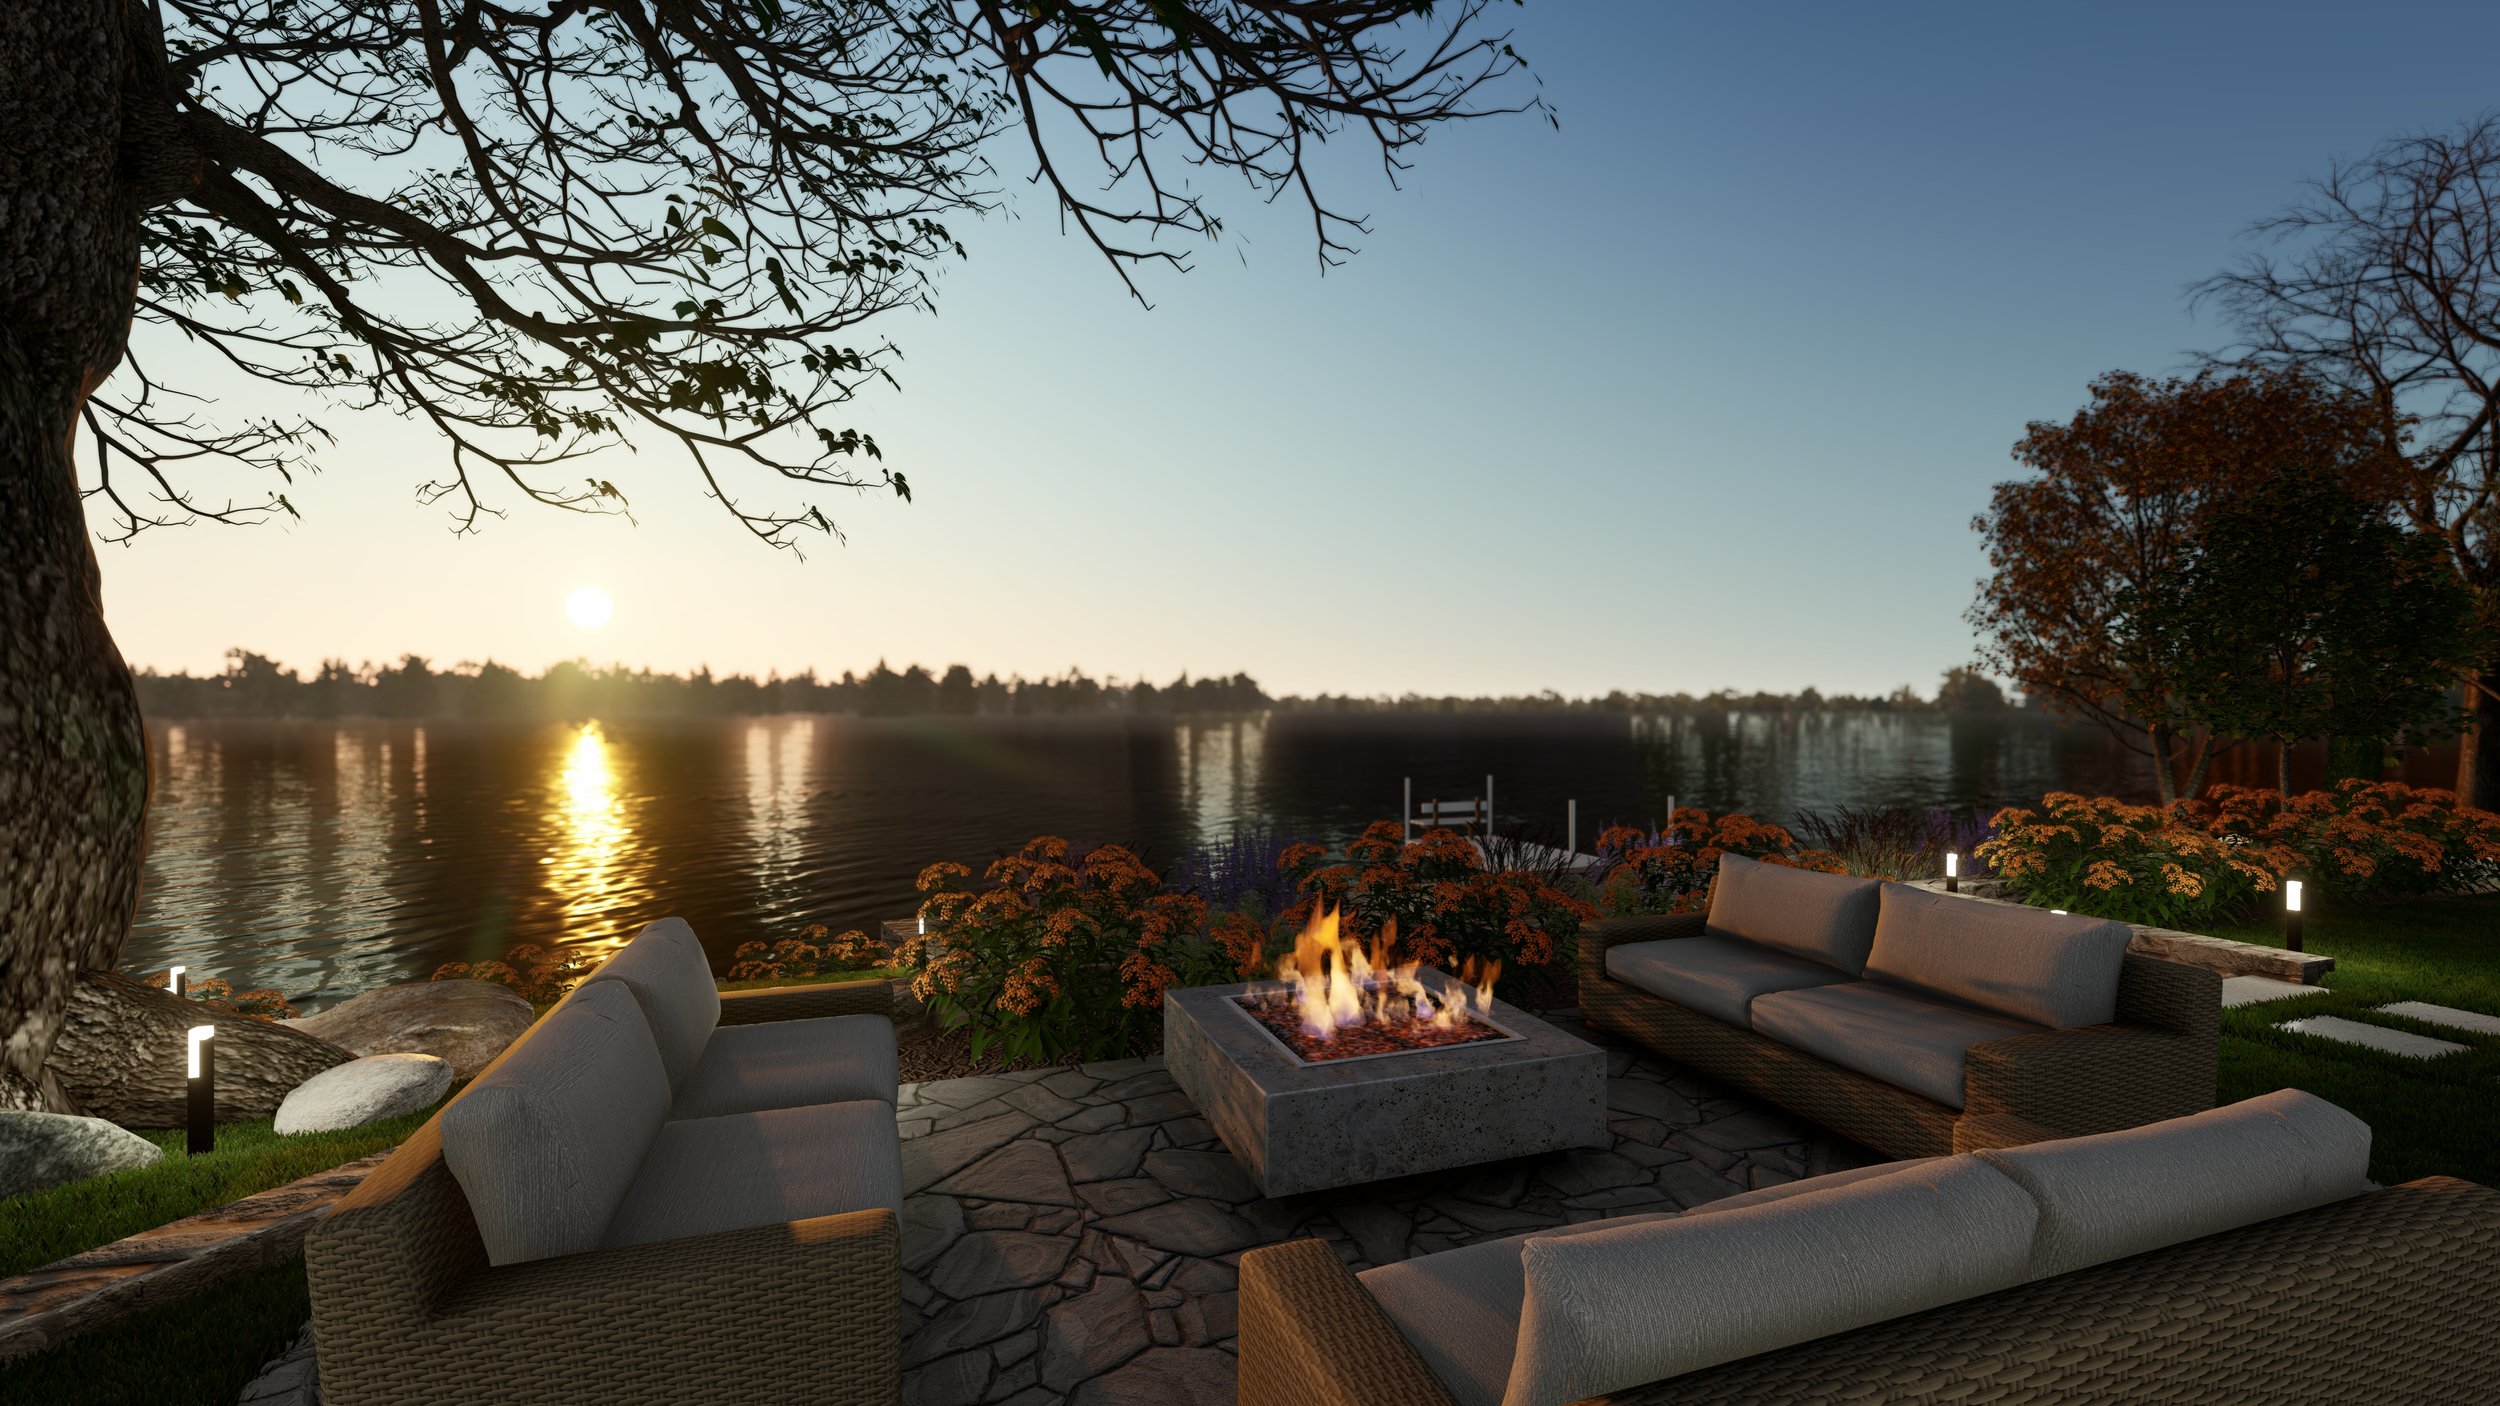 Lakeside outdoor stone patio with three Abaco Sofas and square fire pit at sunset.